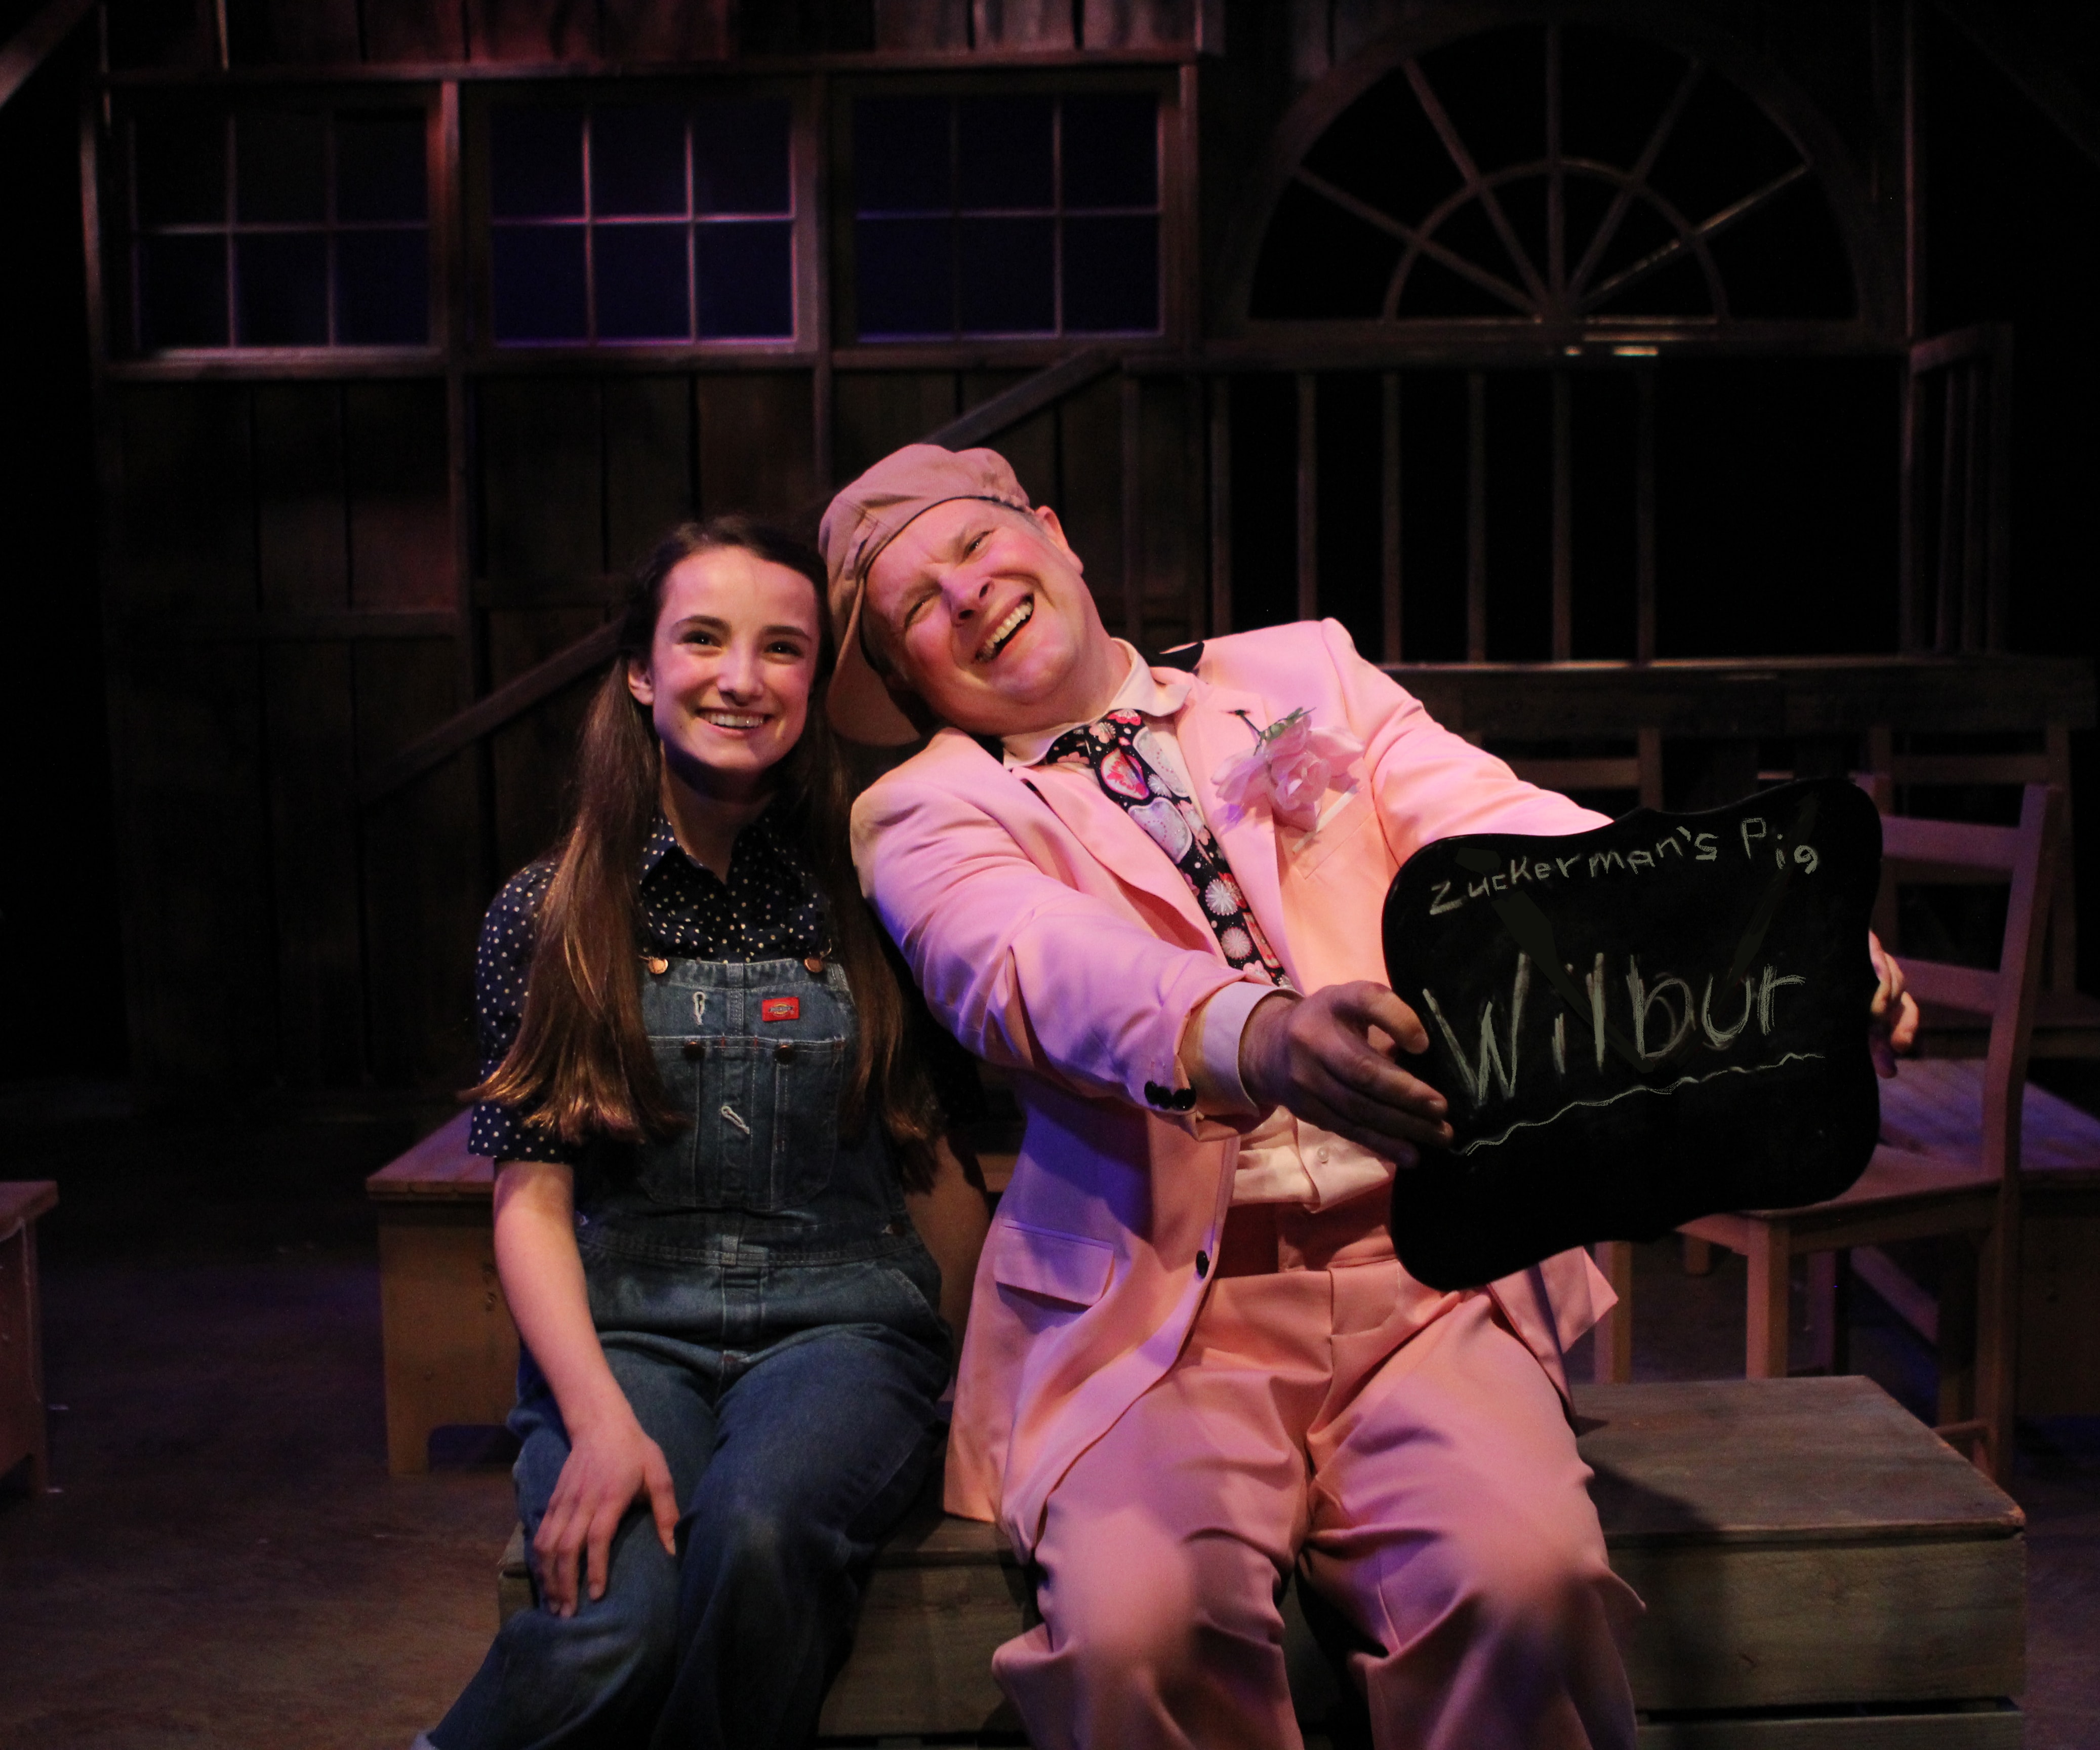 Sophia Manicone (Fern) and Will Stevenson (Wilbur) in Charlotte's Web, now playing at Creative Cauldron. Photo by Noah Taylor.